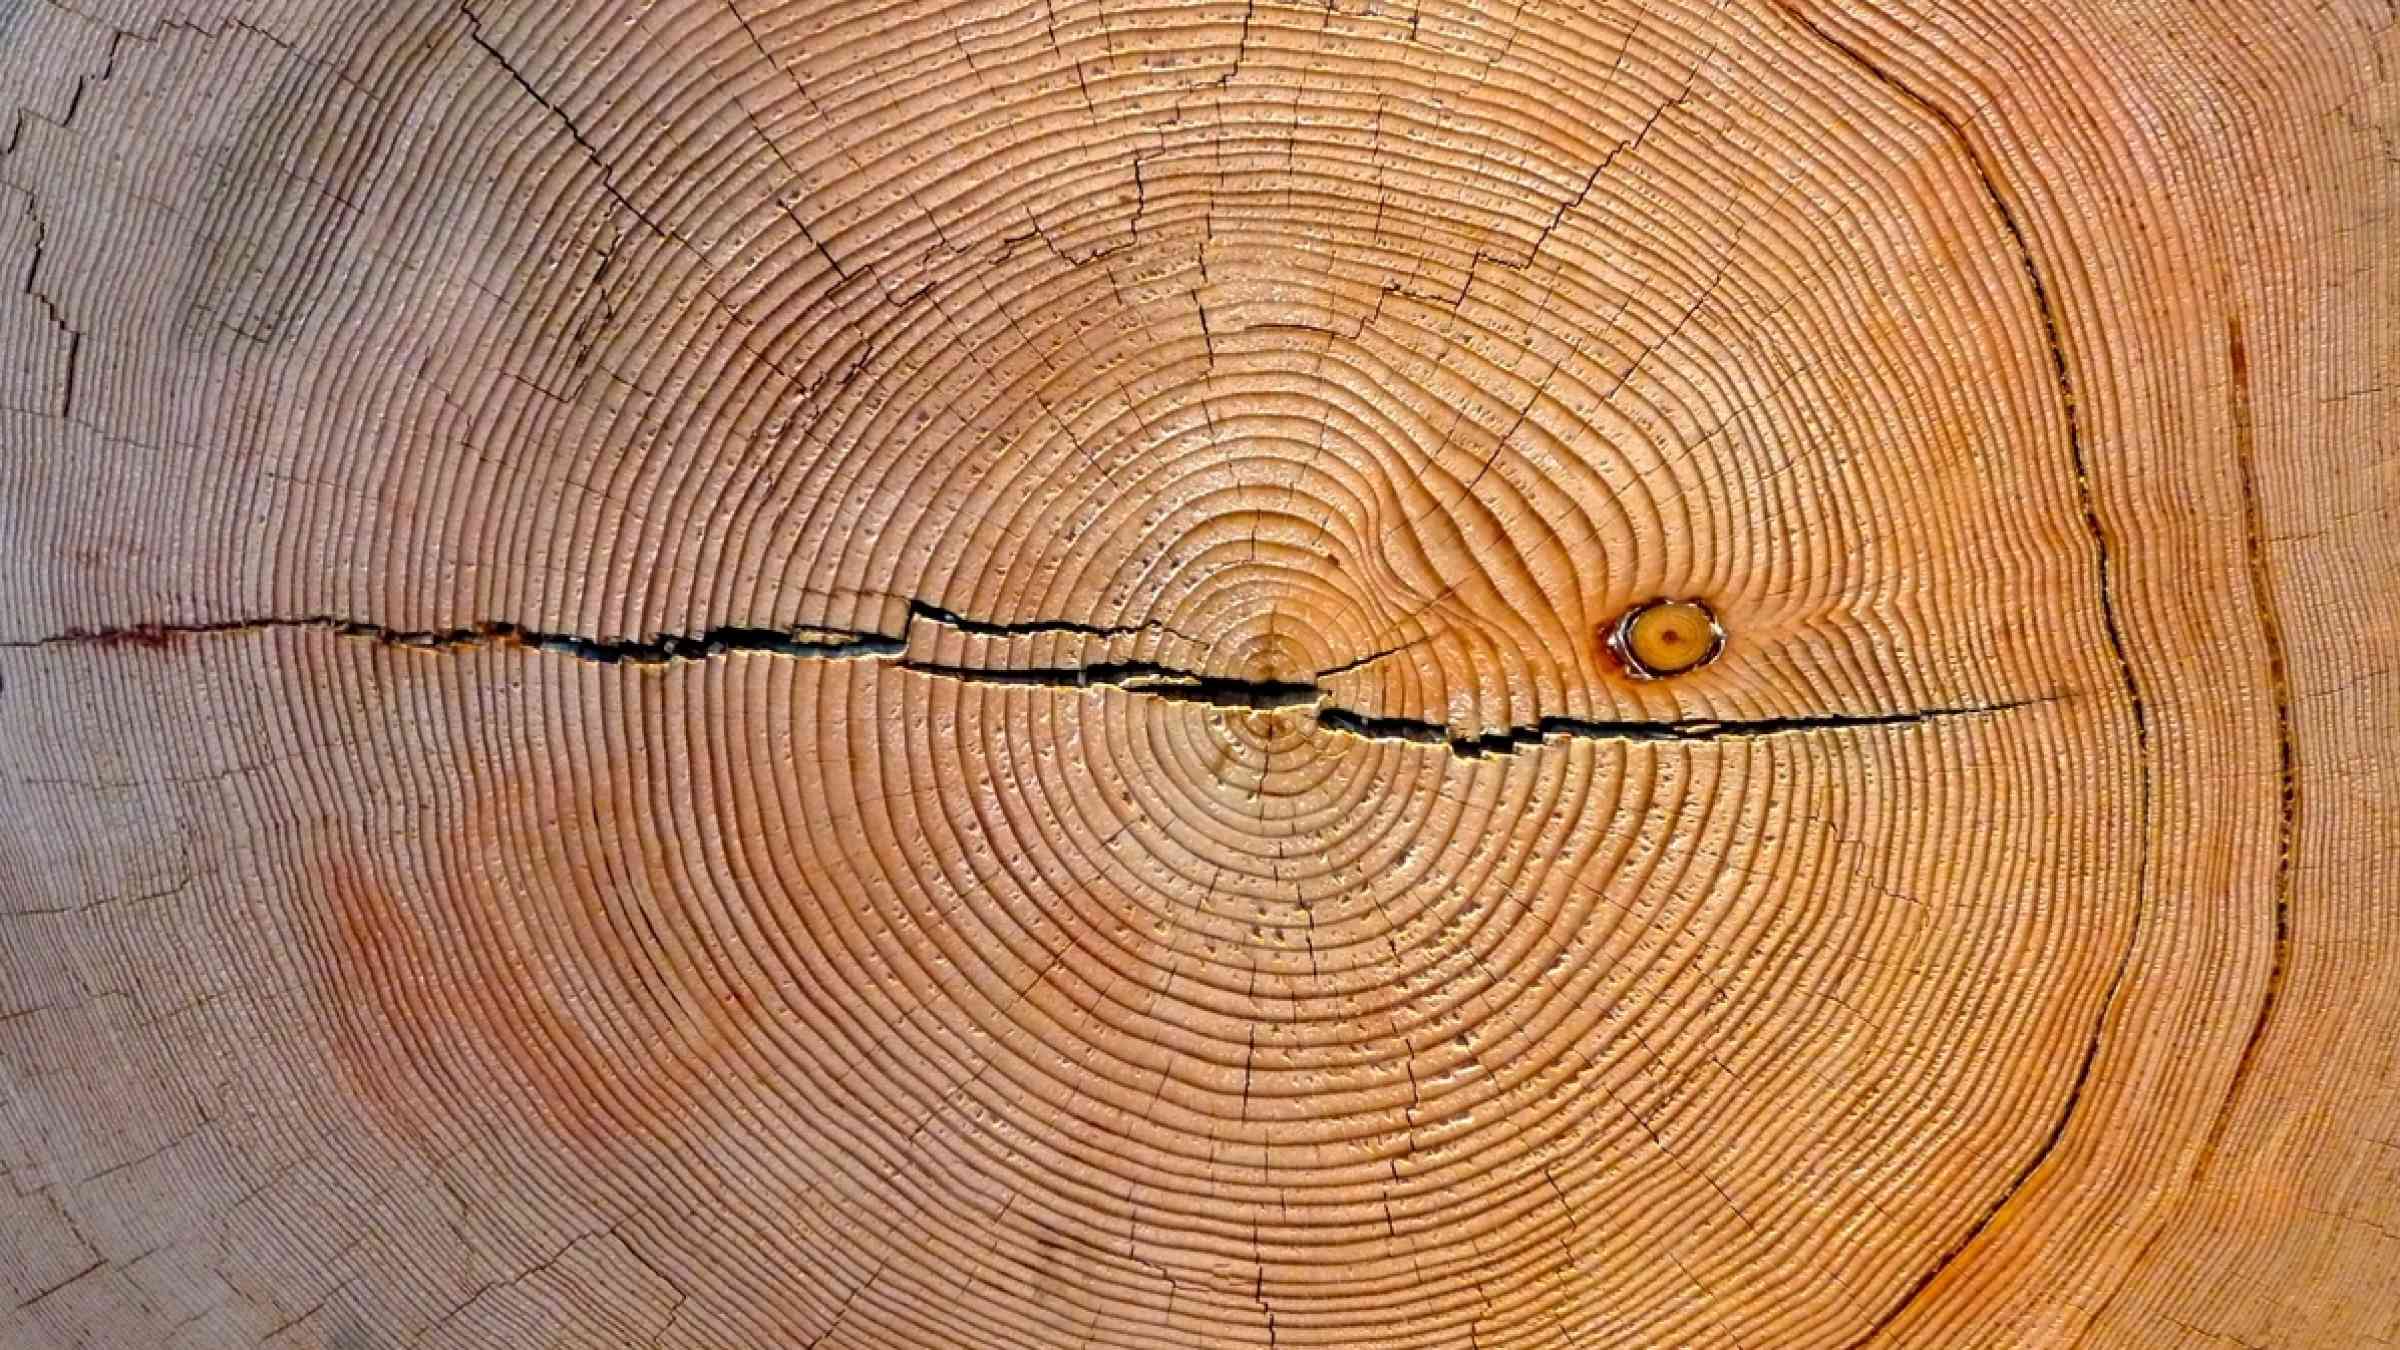 Tree rings show historic climatic changes 